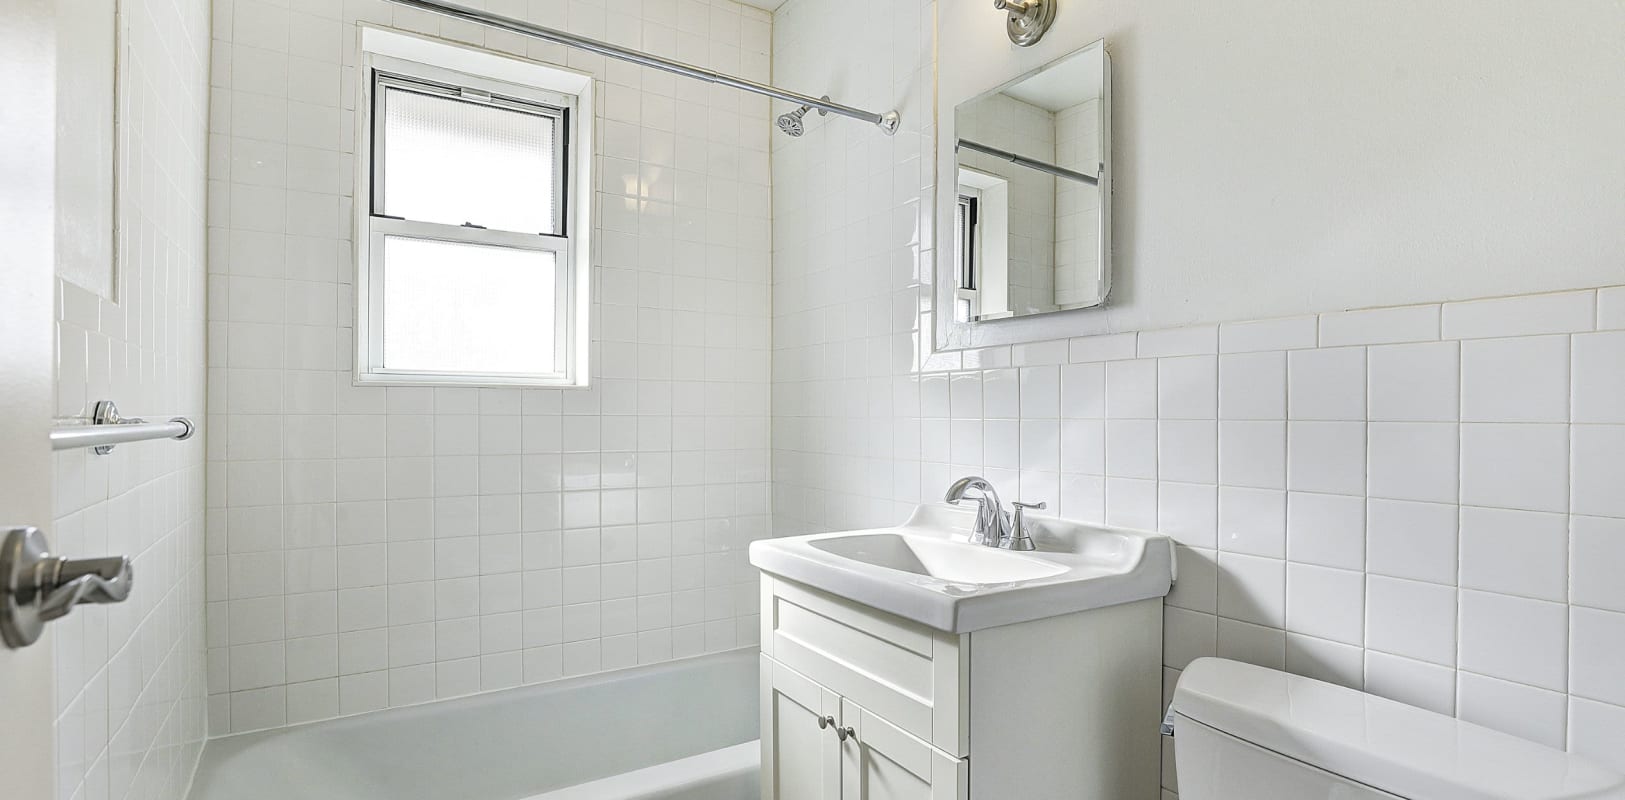 Clean bathroom at Garret Village Apartments in Clifton, New Jersey